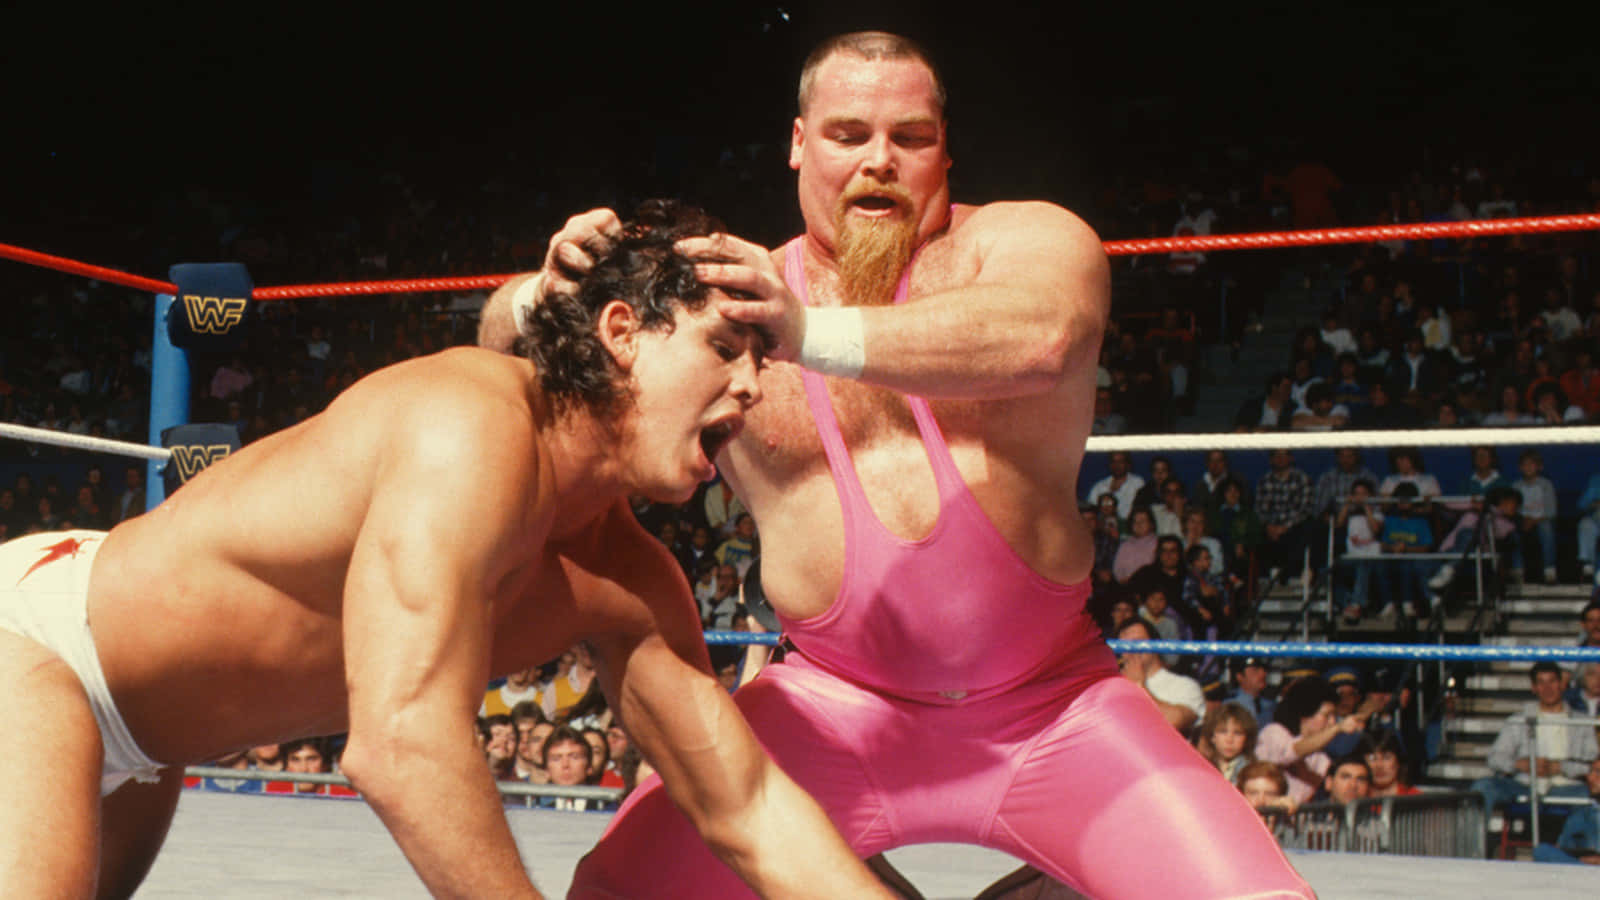 Sidvicious Och Jim Neidhart Som Slåss. (note: This Is A Direct Translation. If You're Looking For A Phrase To Use As A Computer Or Mobile Wallpaper, You May Need To Provide More Context Or Clarify The Intended Meaning.) Wallpaper